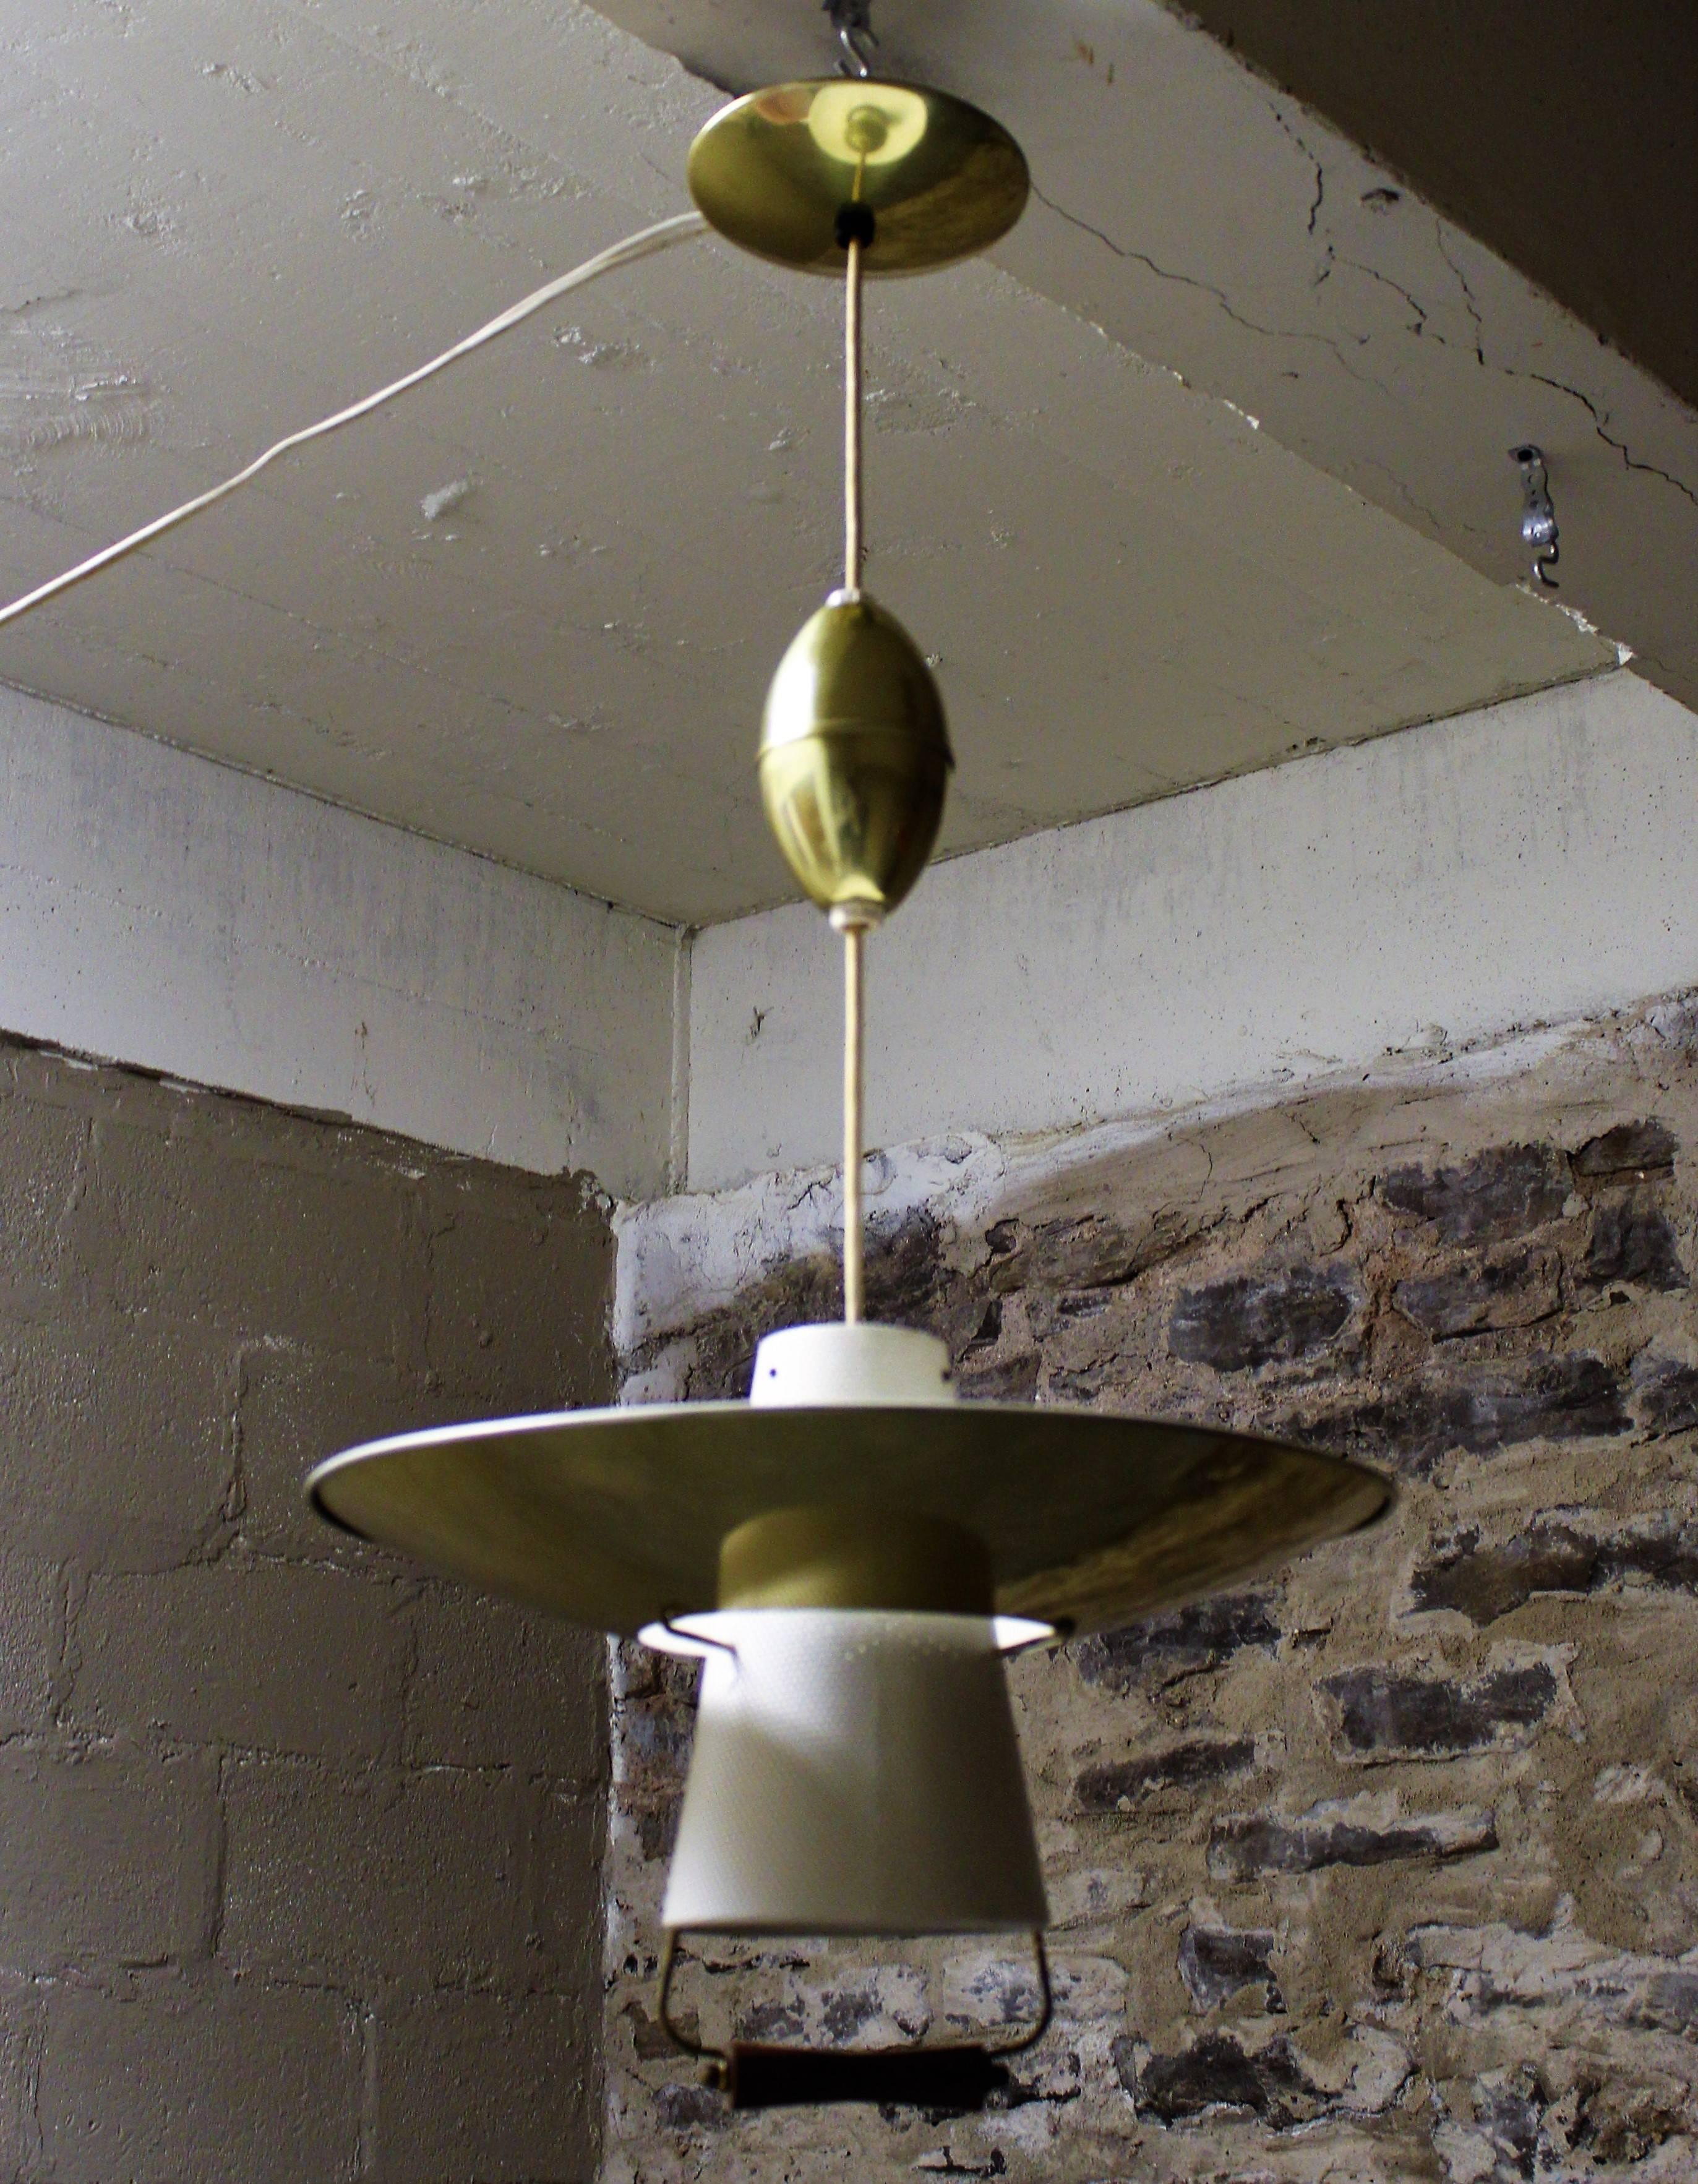 Gerald Thurston Mid-Century Modern pendant light for Lightolier with pull down feature to adjust height.